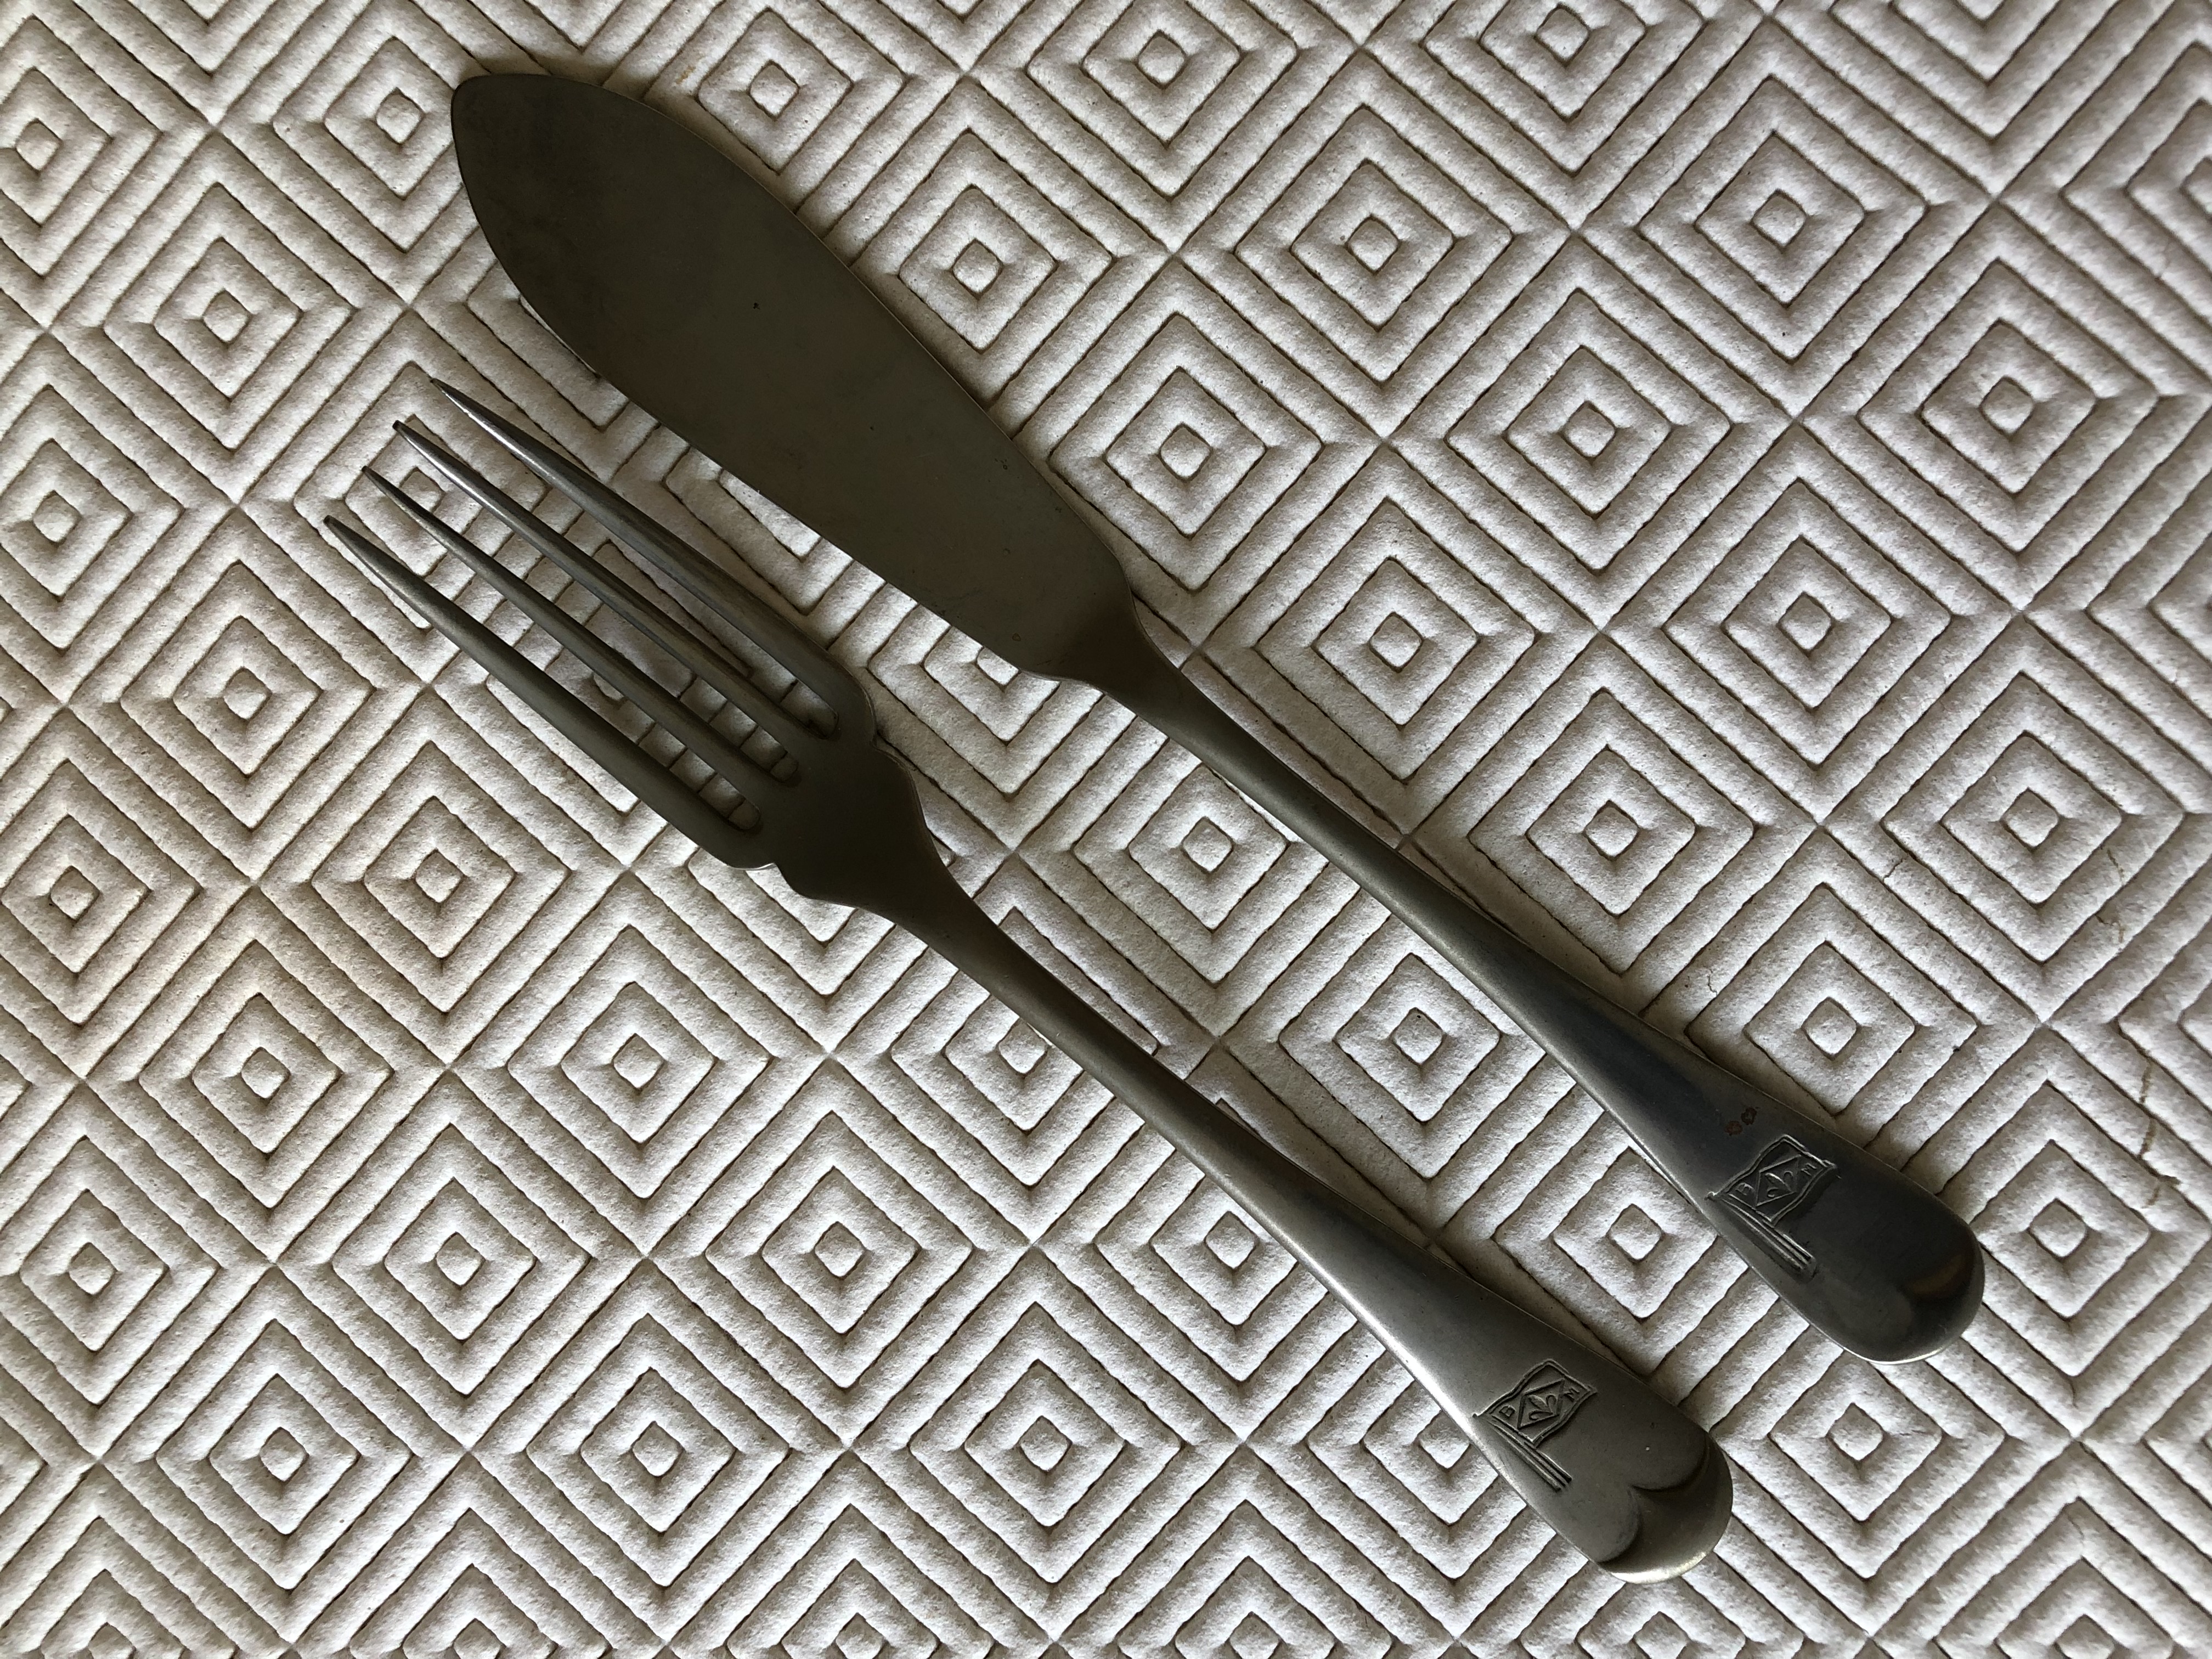 AS USED IN SERVICE SHIPS DINING KNIFE AND FORK FROM THE BURIES MARKS LINE